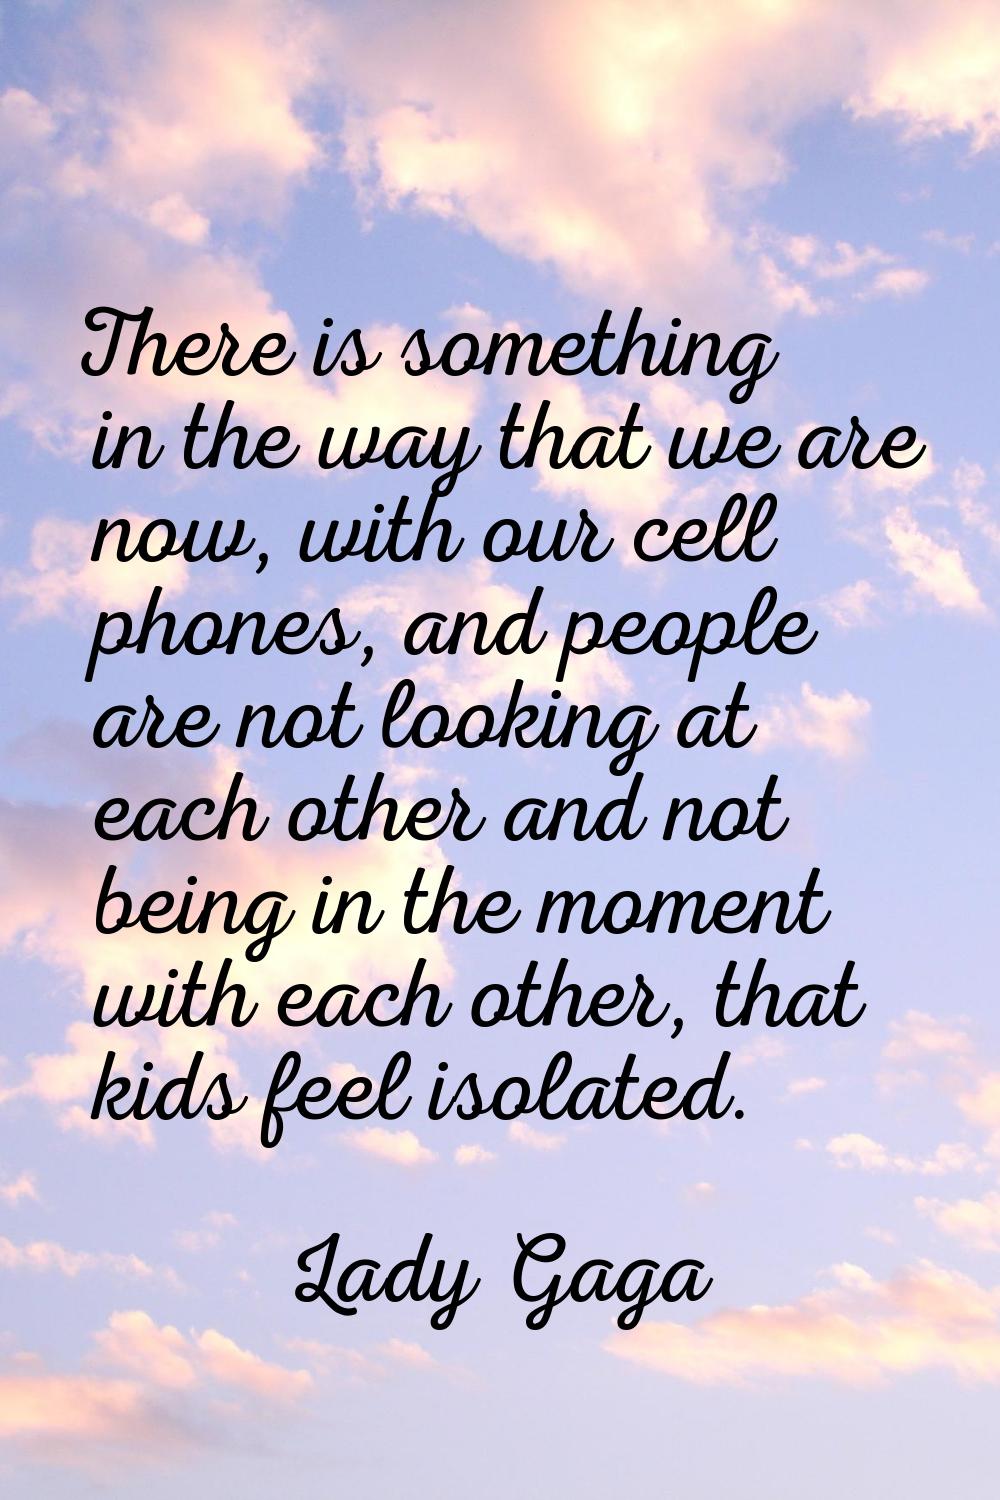 There is something in the way that we are now, with our cell phones, and people are not looking at 